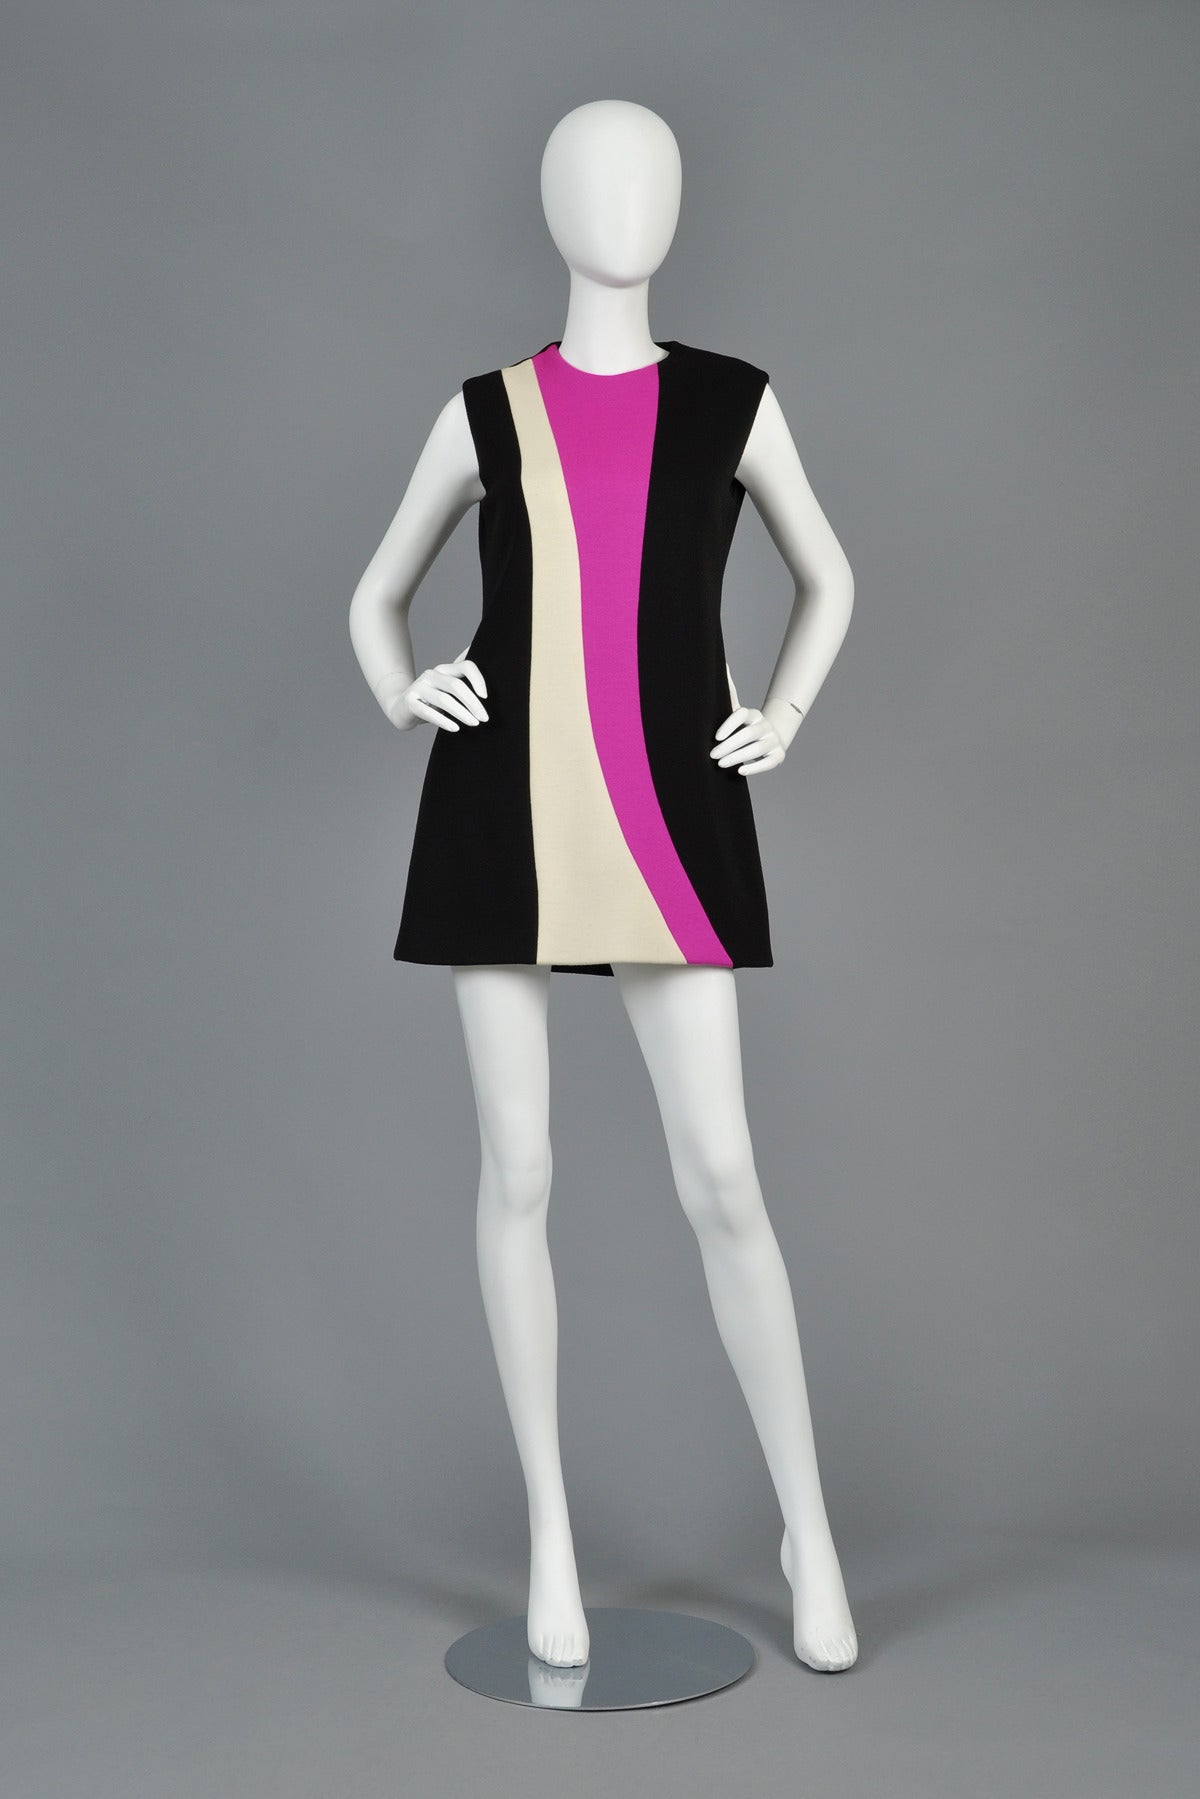 Fantastic 1960s Pierre Cardin color blocked couture  tunic. Classic Cardin space age beauty. High neck and sleeveless with slightly flared hem. Can easily be worn as a tunic over pants or a mini dress. Heavyweight wool crepe. Zips in back. Excellent